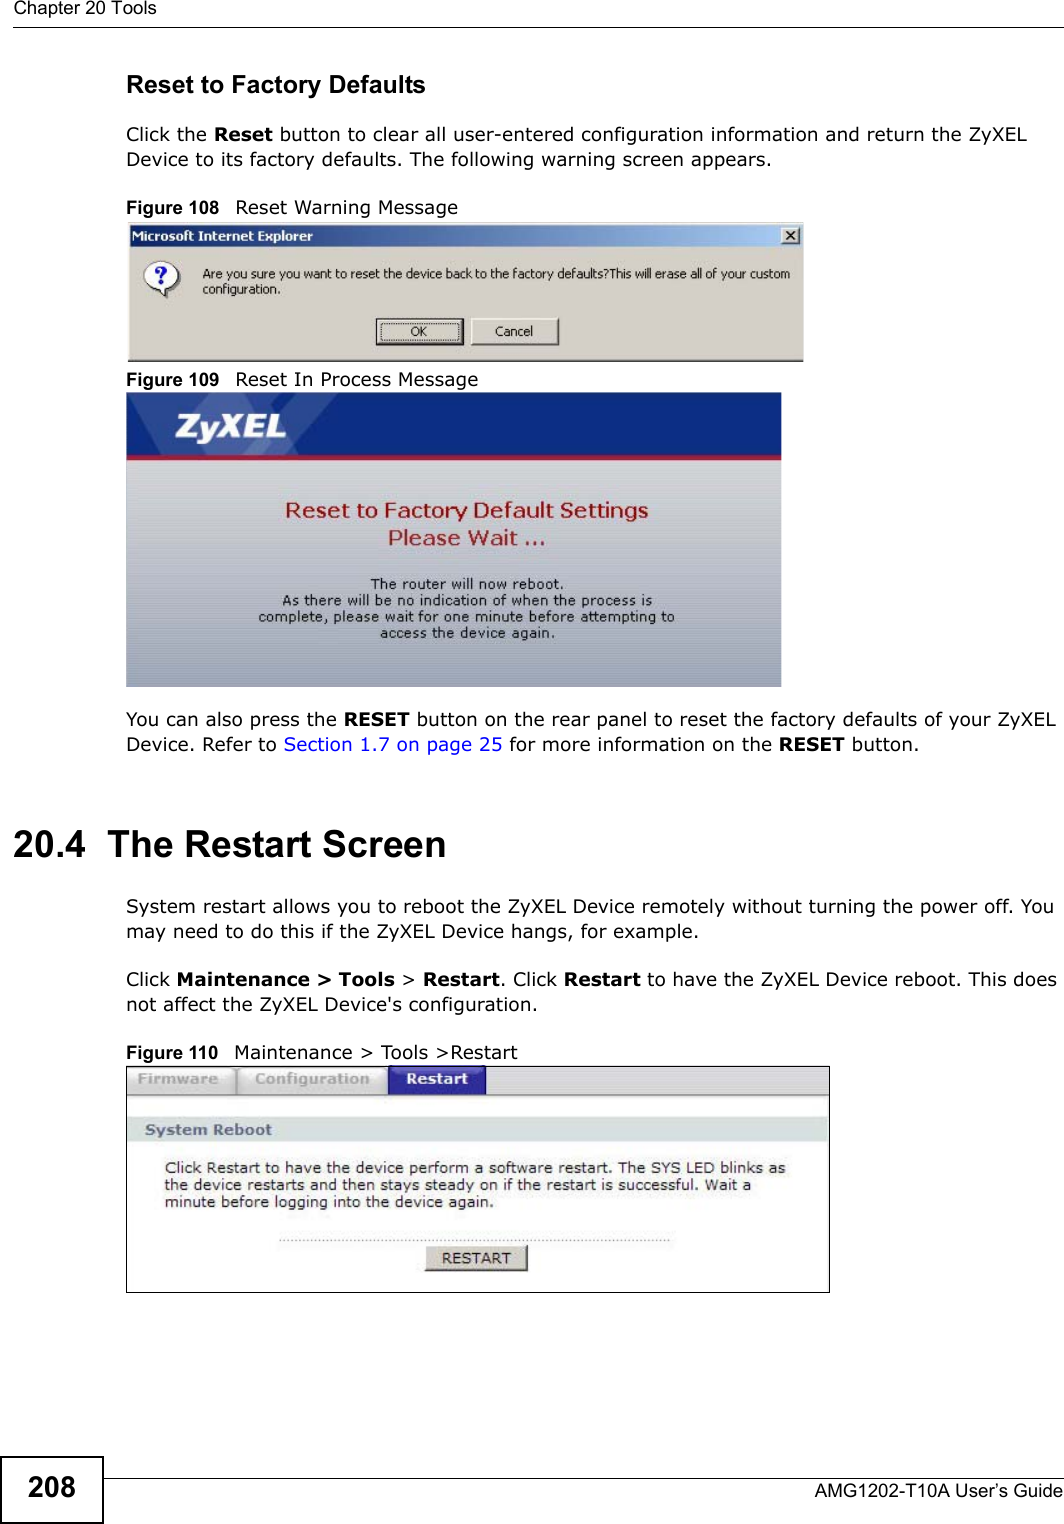 Chapter 20 ToolsAMG1202-T10A User’s Guide208Reset to Factory Defaults  Click the Reset button to clear all user-entered configuration information and return the ZyXEL Device to its factory defaults. The following warning screen appears.Figure 108   Reset Warning MessageFigure 109   Reset In Process MessageYou can also press the RESET button on the rear panel to reset the factory defaults of your ZyXEL Device. Refer to Section 1.7 on page 25 for more information on the RESET button.20.4  The Restart Screen System restart allows you to reboot the ZyXEL Device remotely without turning the power off. You may need to do this if the ZyXEL Device hangs, for example.Click Maintenance &gt; Tools &gt; Restart. Click Restart to have the ZyXEL Device reboot. This does not affect the ZyXEL Device&apos;s configuration. Figure 110   Maintenance &gt; Tools &gt;Restart 